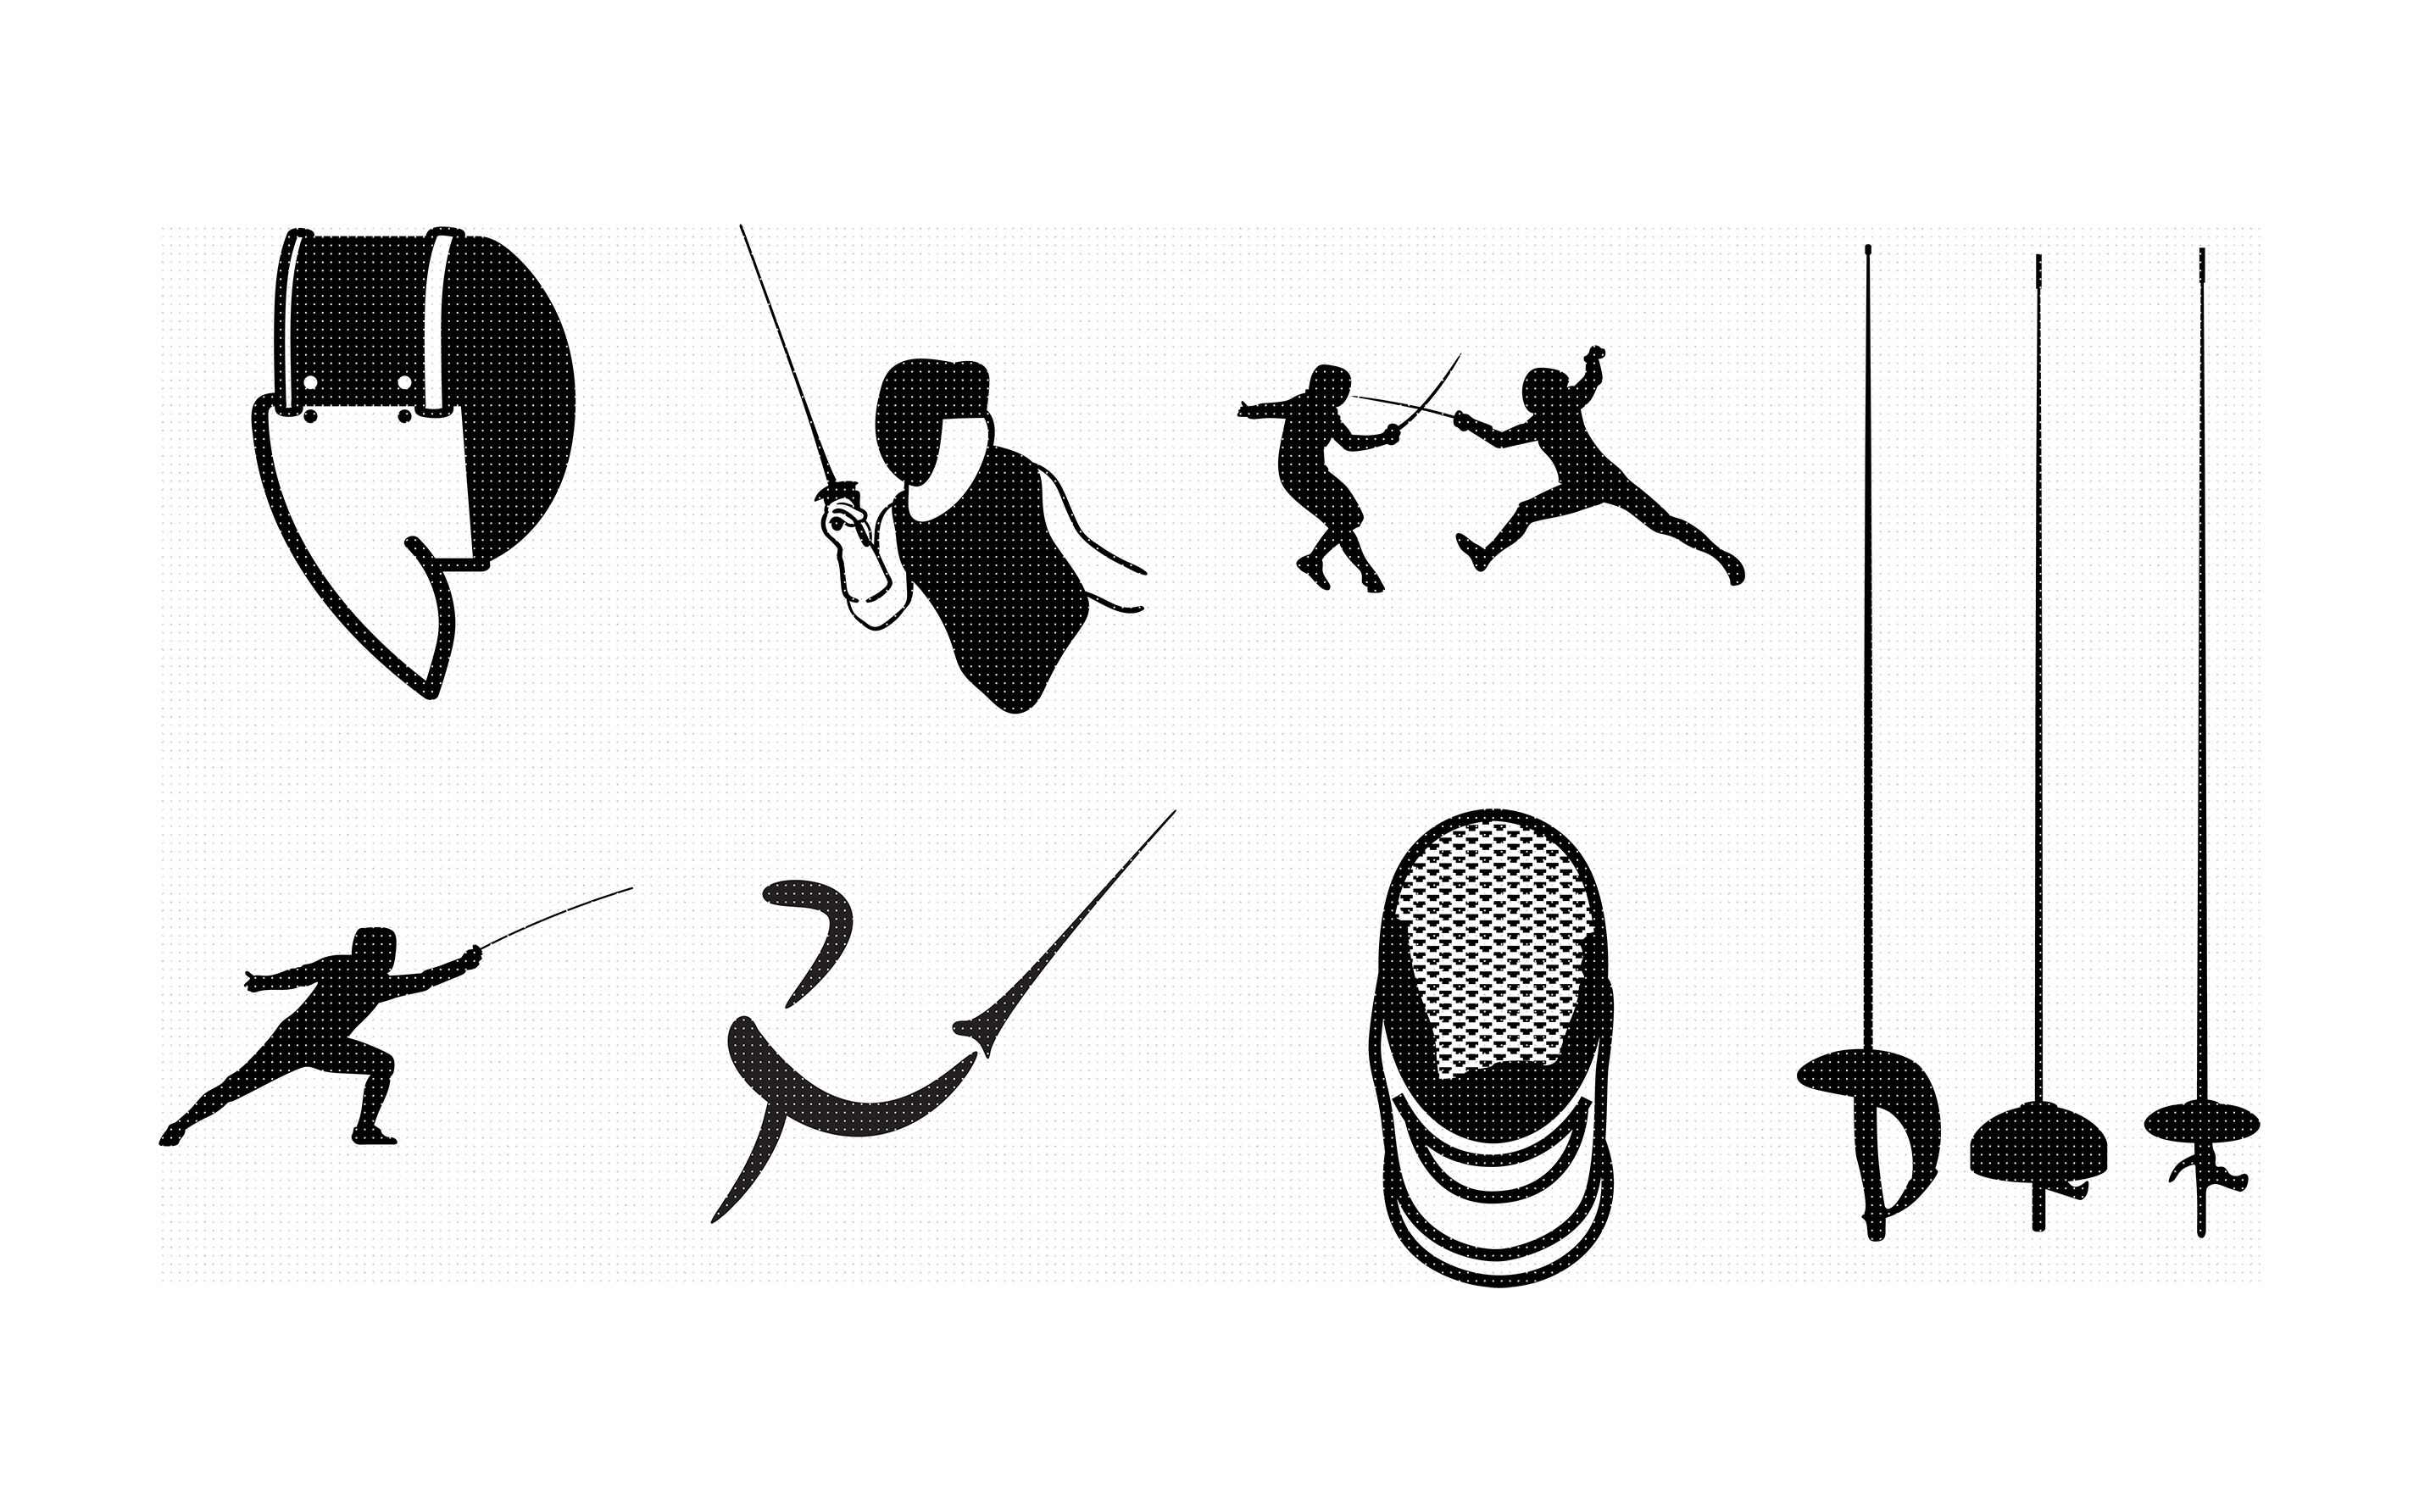 ori 3653953 uy1v64pmc4geaqlib8hc8ddydsab9je80ssl90t7 fencing sword epee foil sabre svg dxf vector eps clipart cric